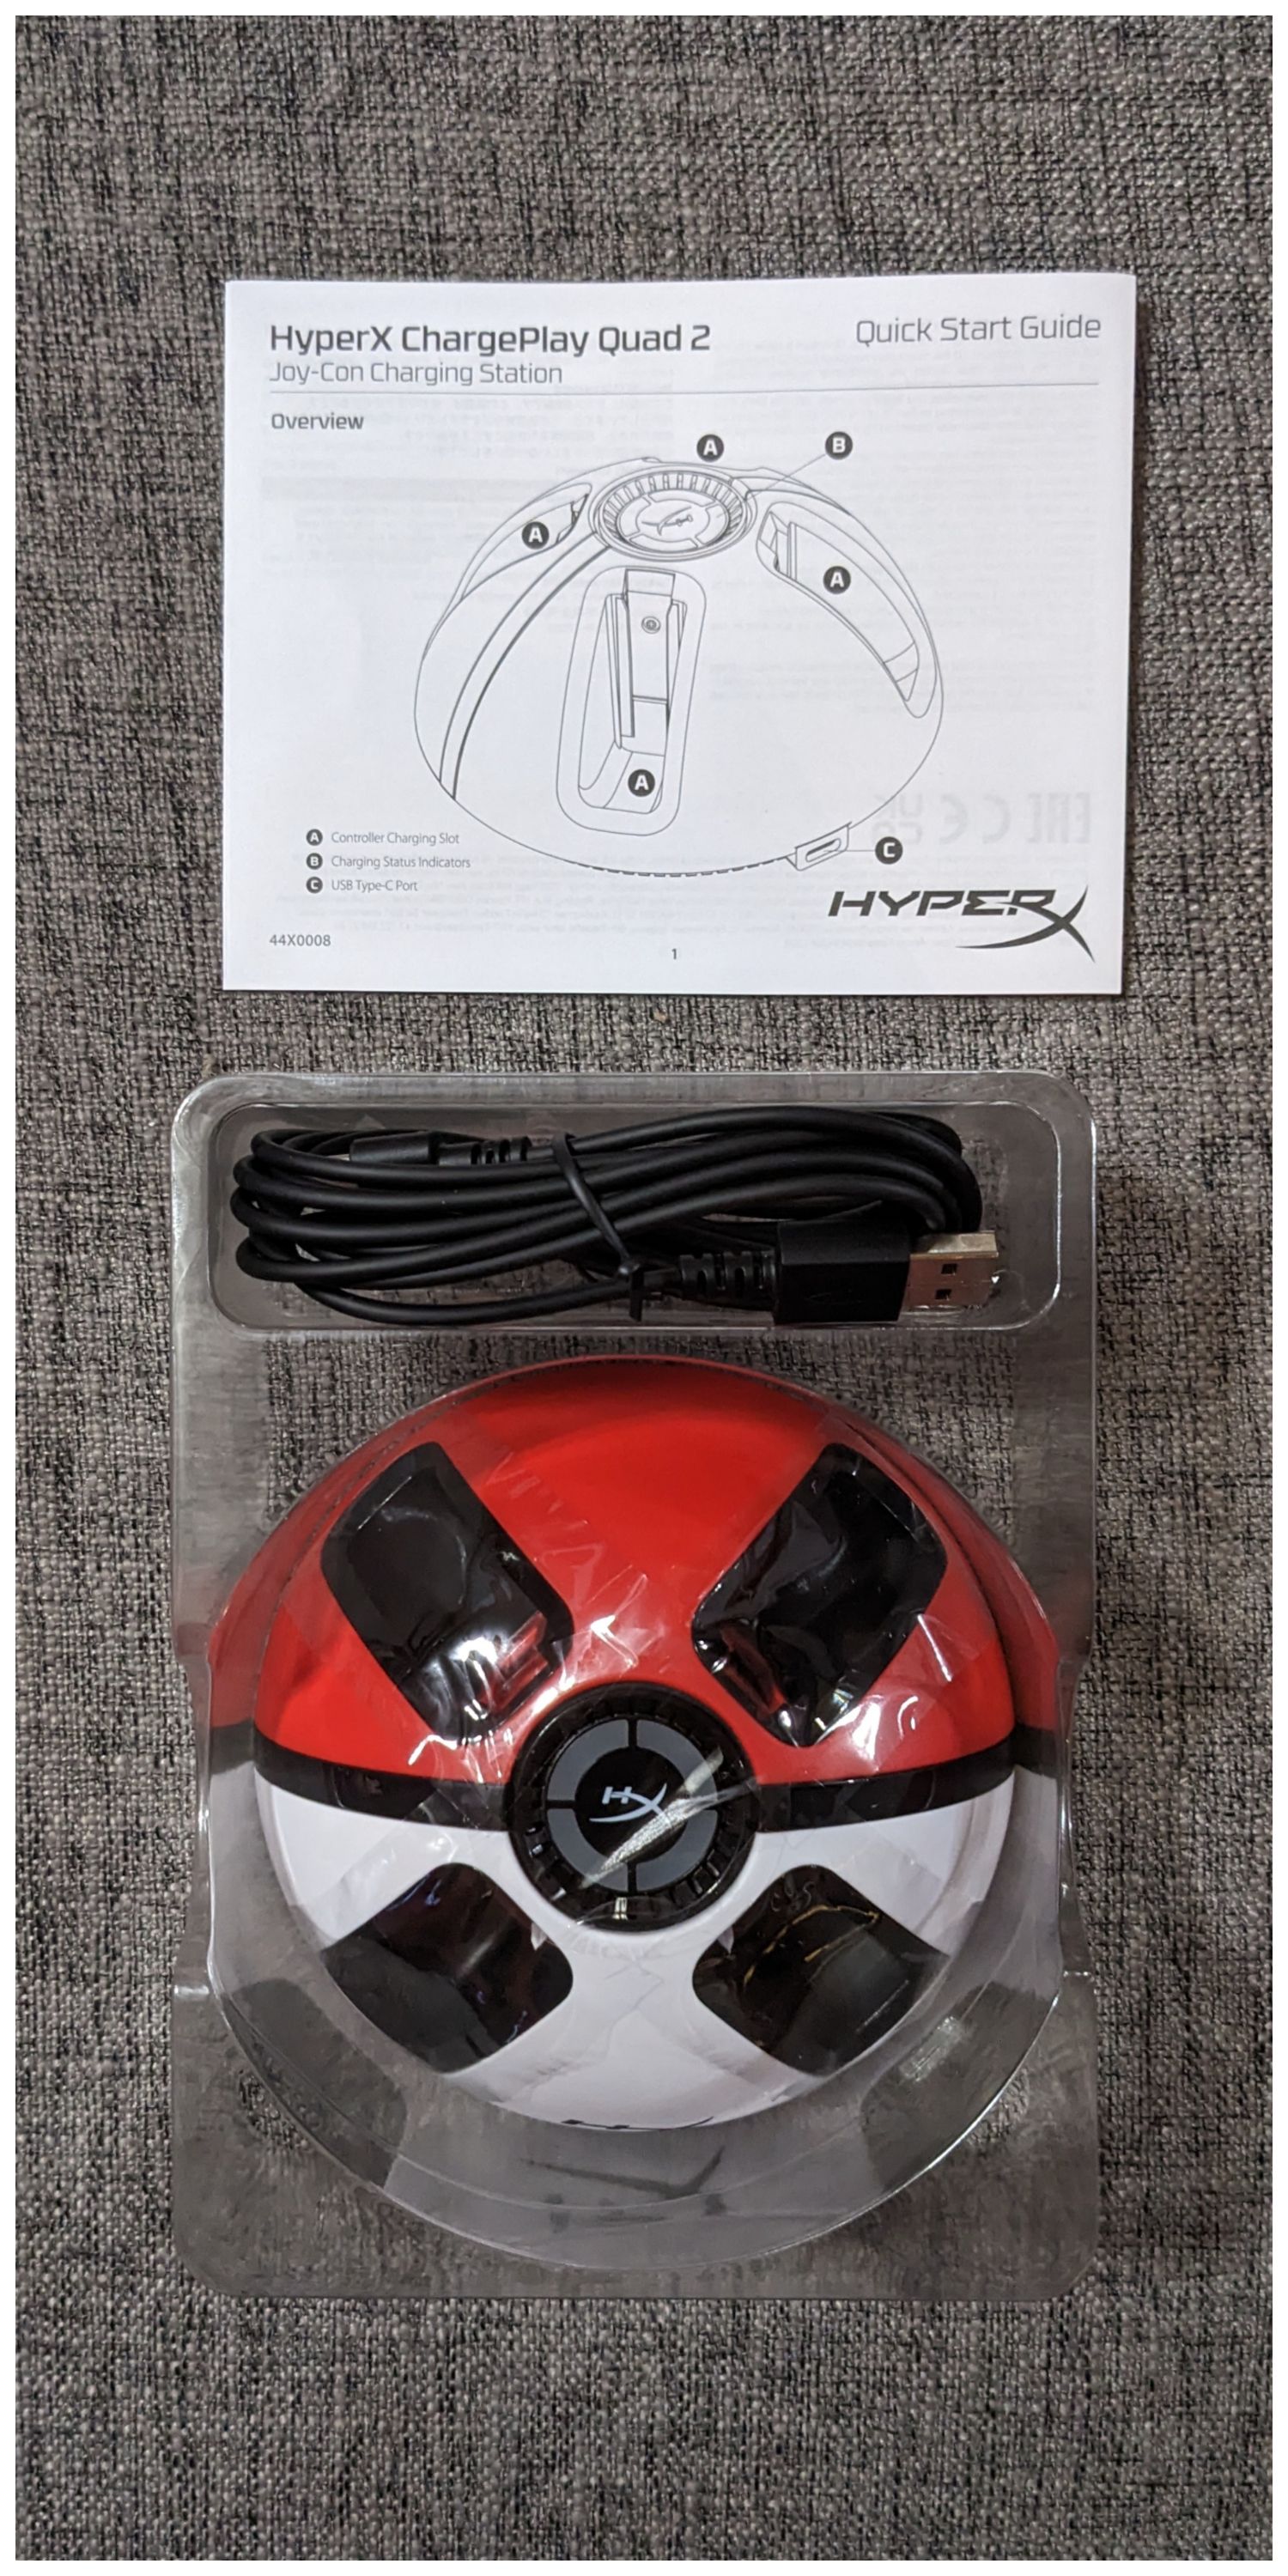 hyperx chargeplay quad 2 whats in the box-1